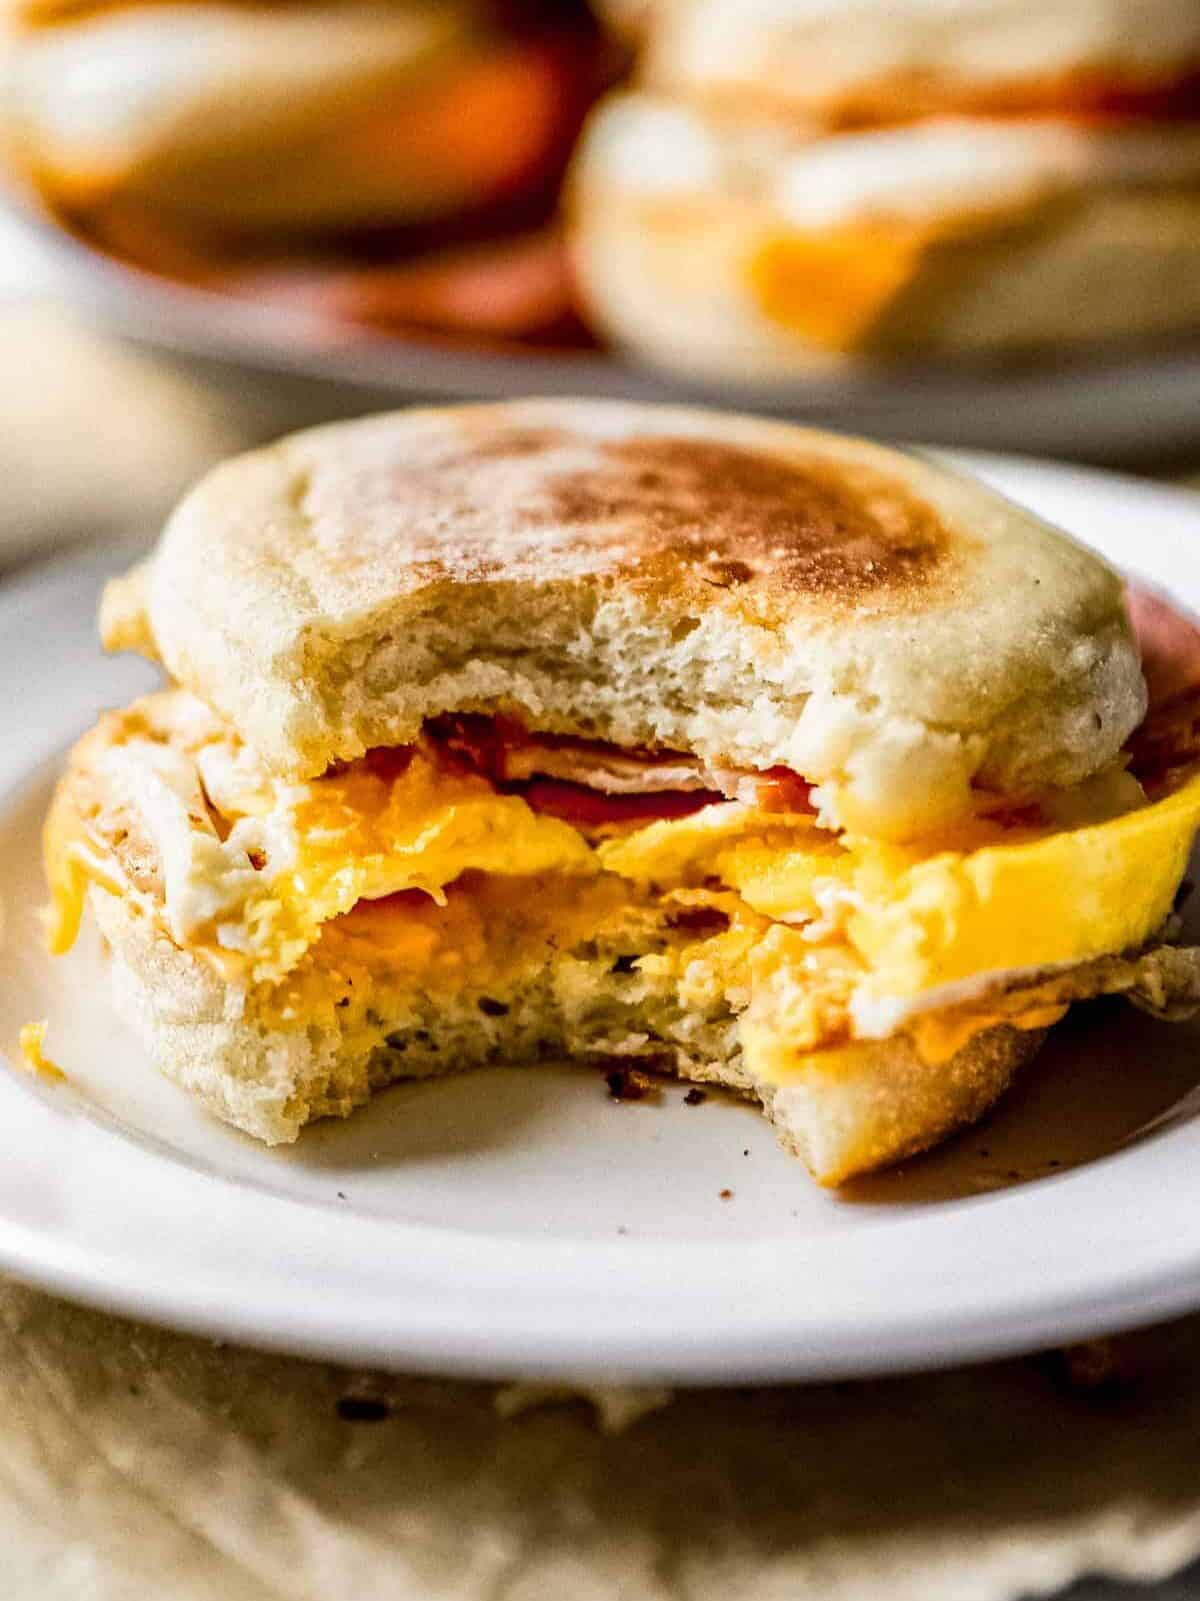 Premade Breakfast sandwich eggs in muffin top panAwesome